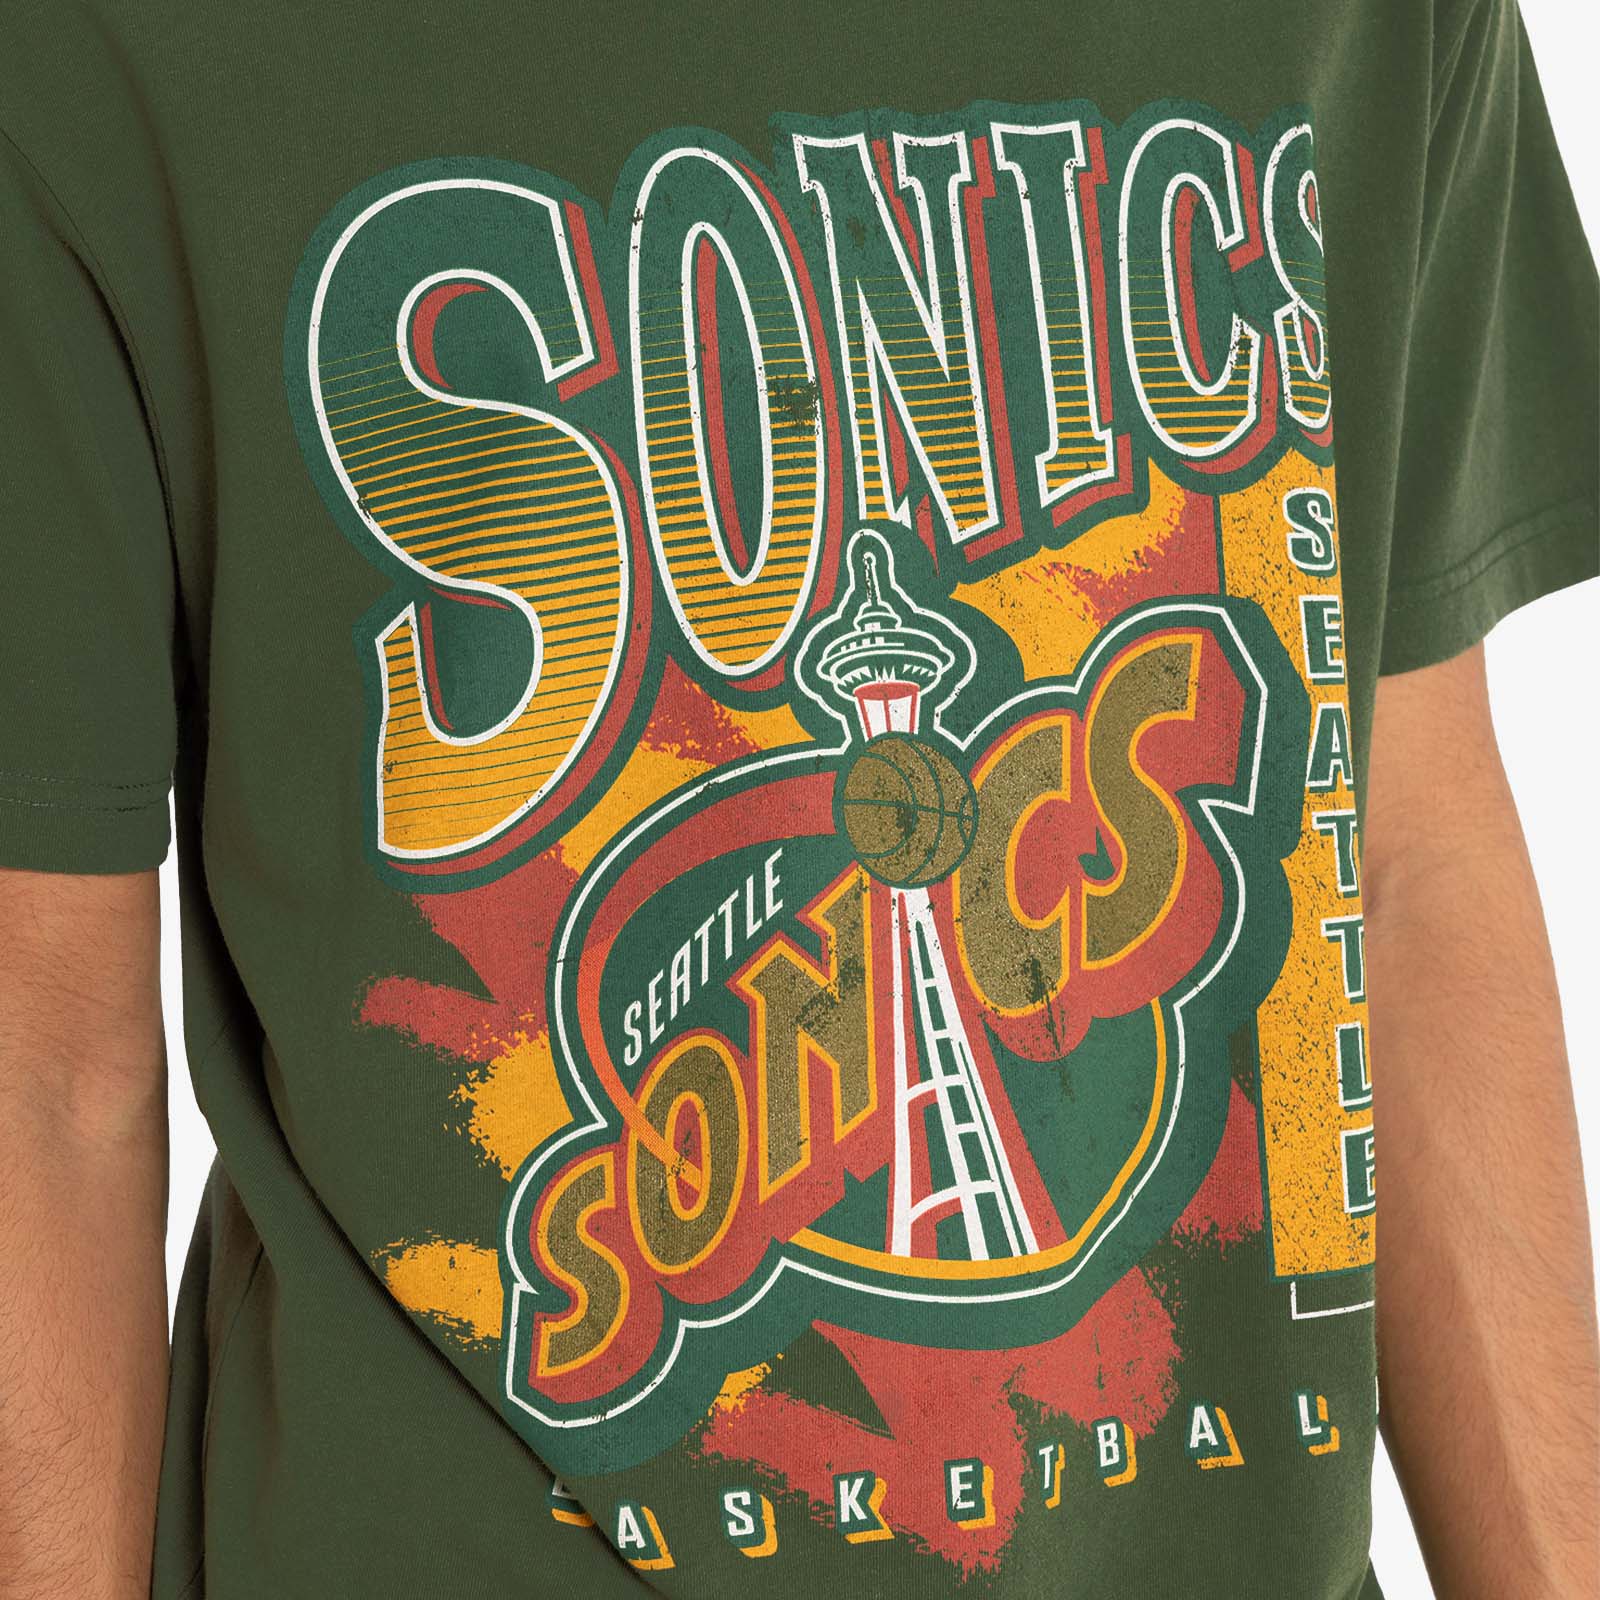 Mitchell & Ness Seattle Sonics Division Arch T-Shirt Faded Green